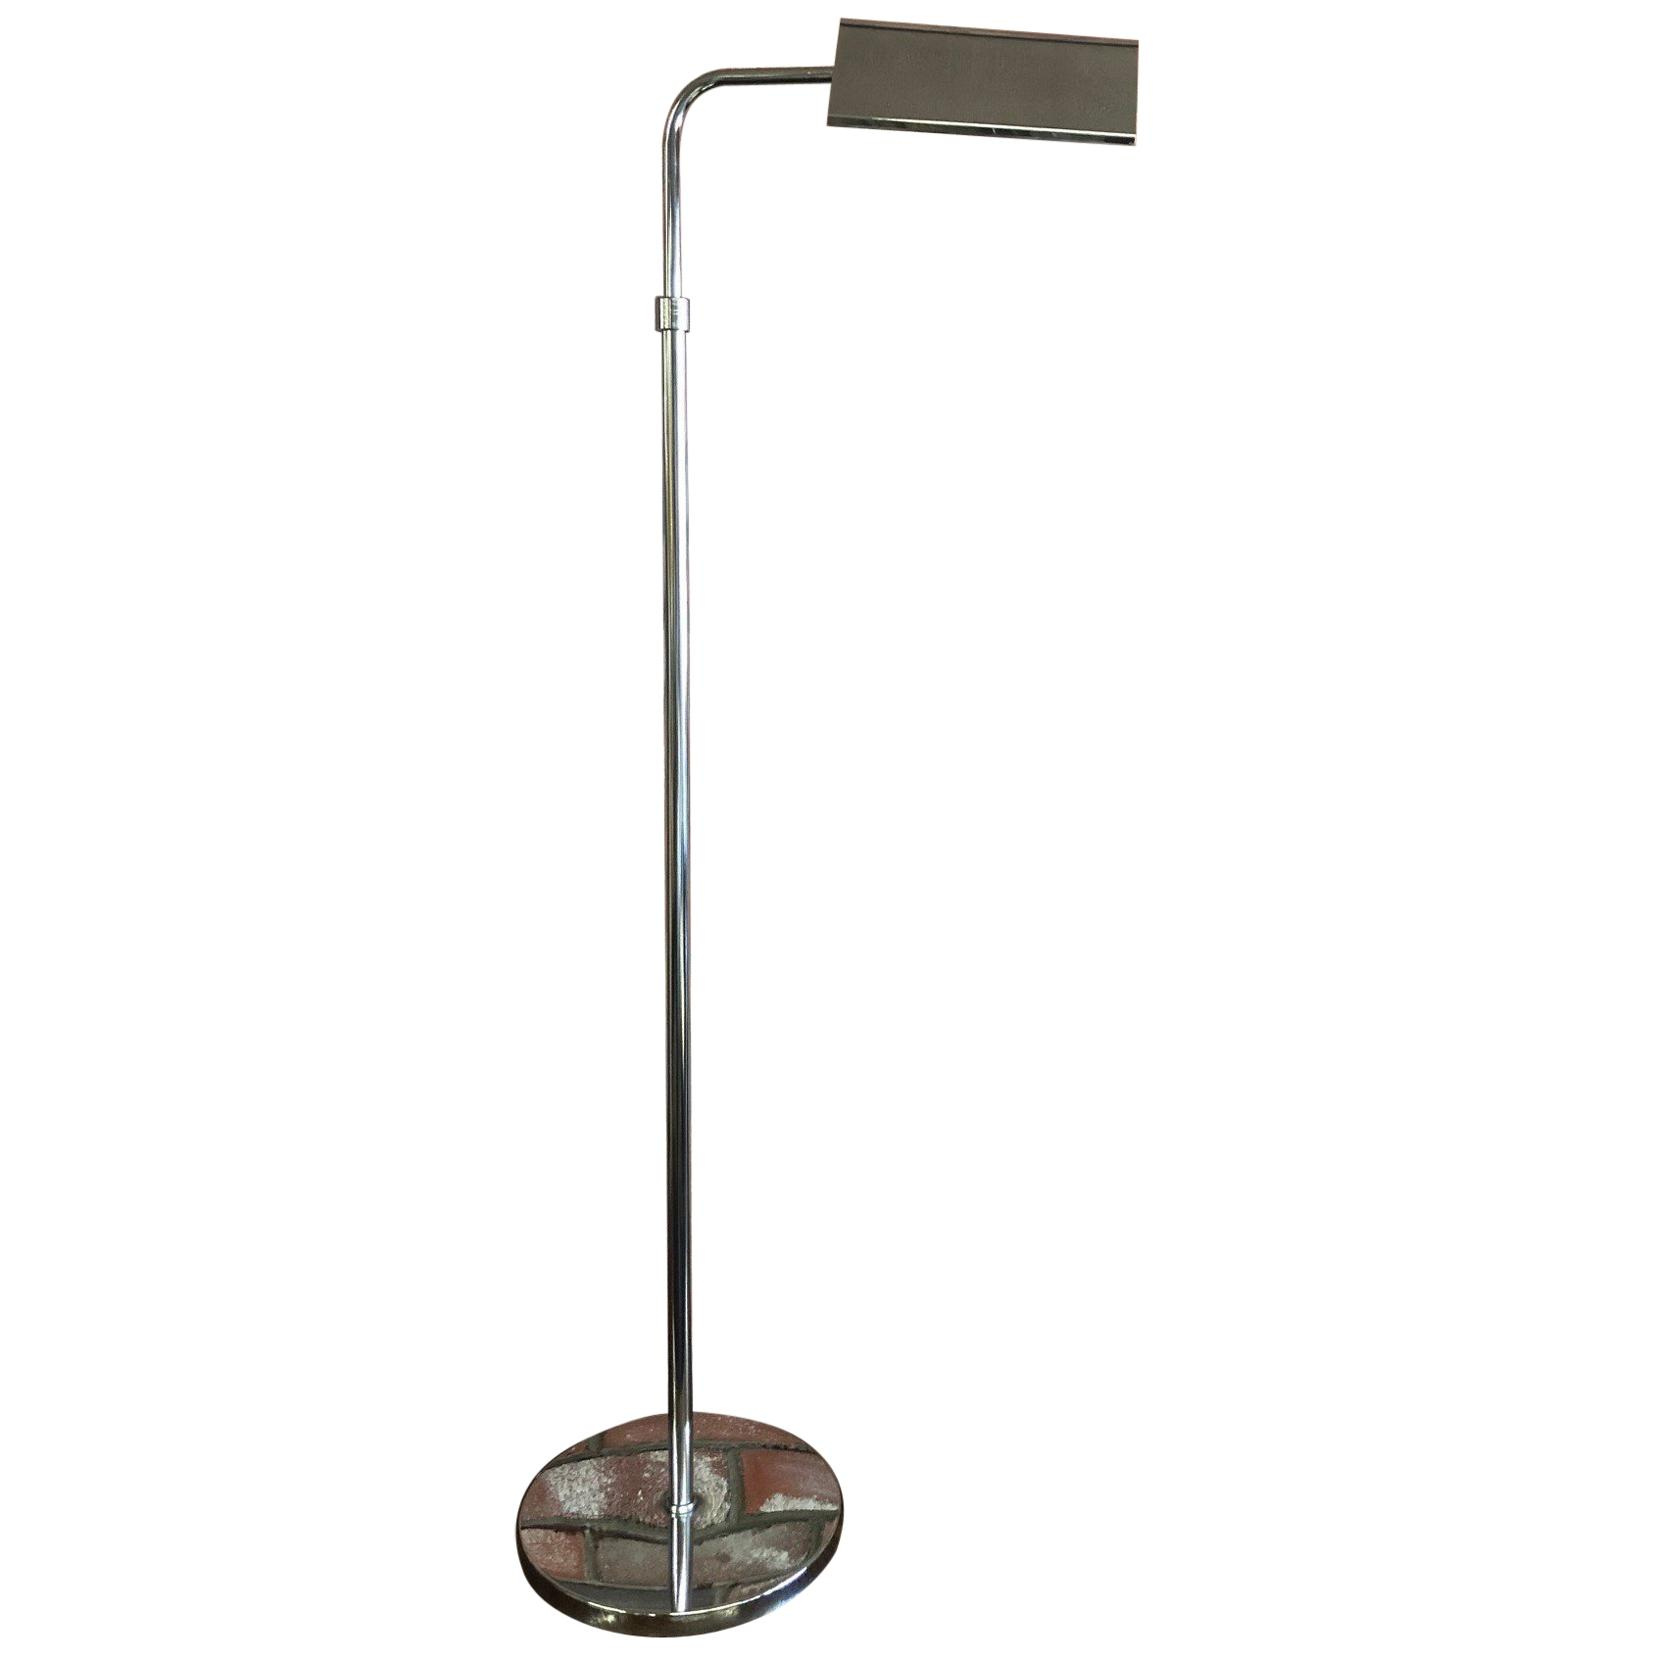 Midcentury Adjustable Chrome Pharmacy Floor Lamp In The Style Of Koch Lowy pertaining to sizing 1655 X 1655